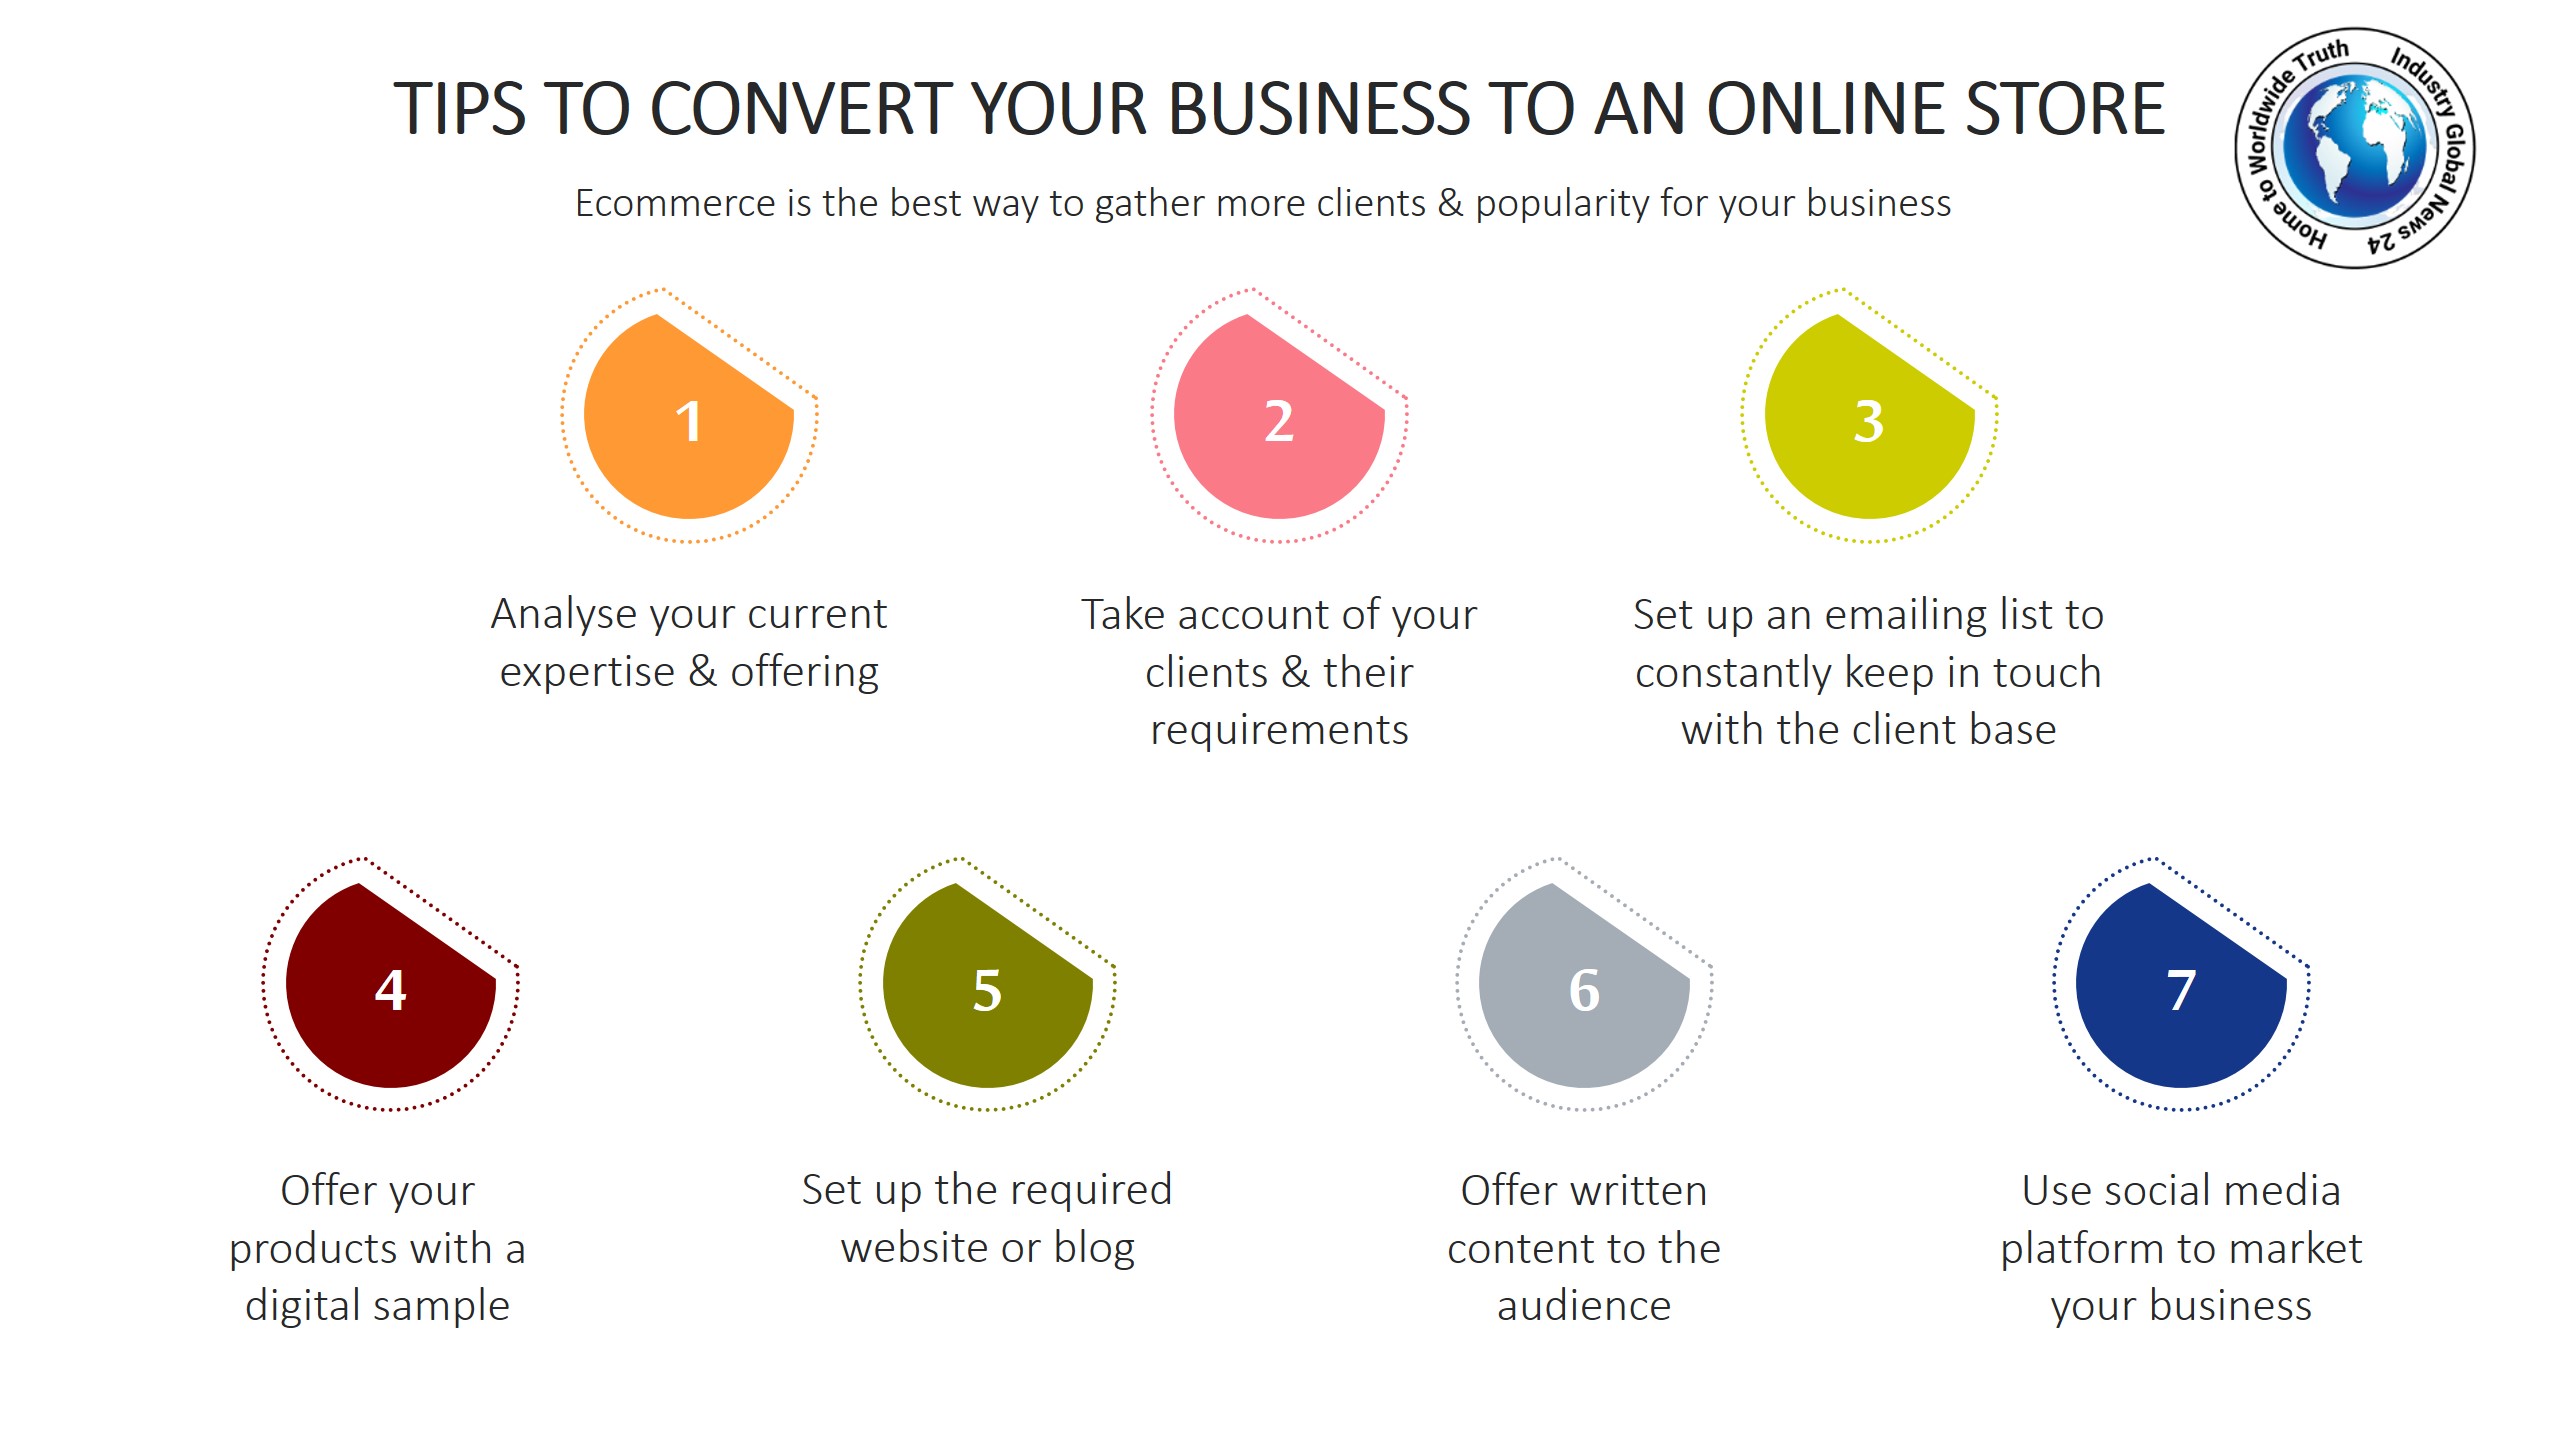 Tips to convert your business to an online store